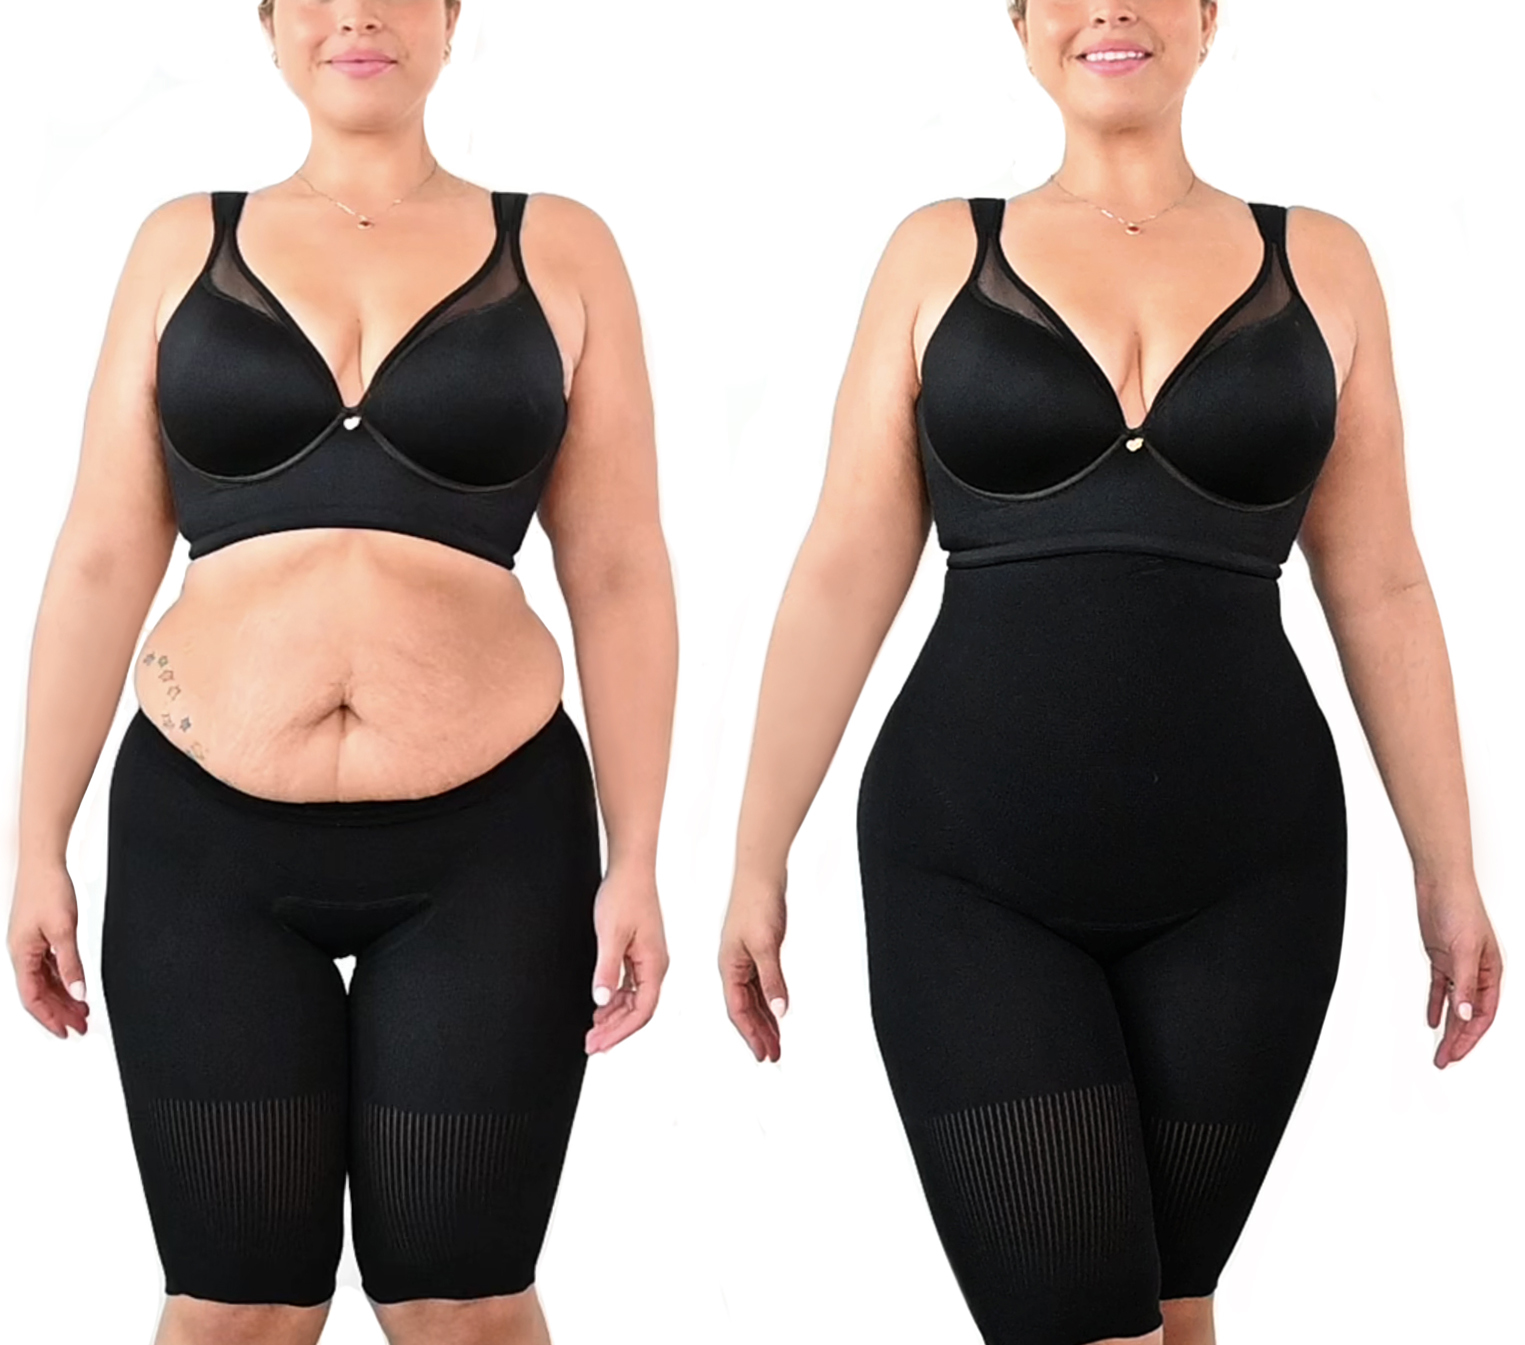 💕Real Review of our Happy Butt No.7 body shapers by the beautiful @Ke